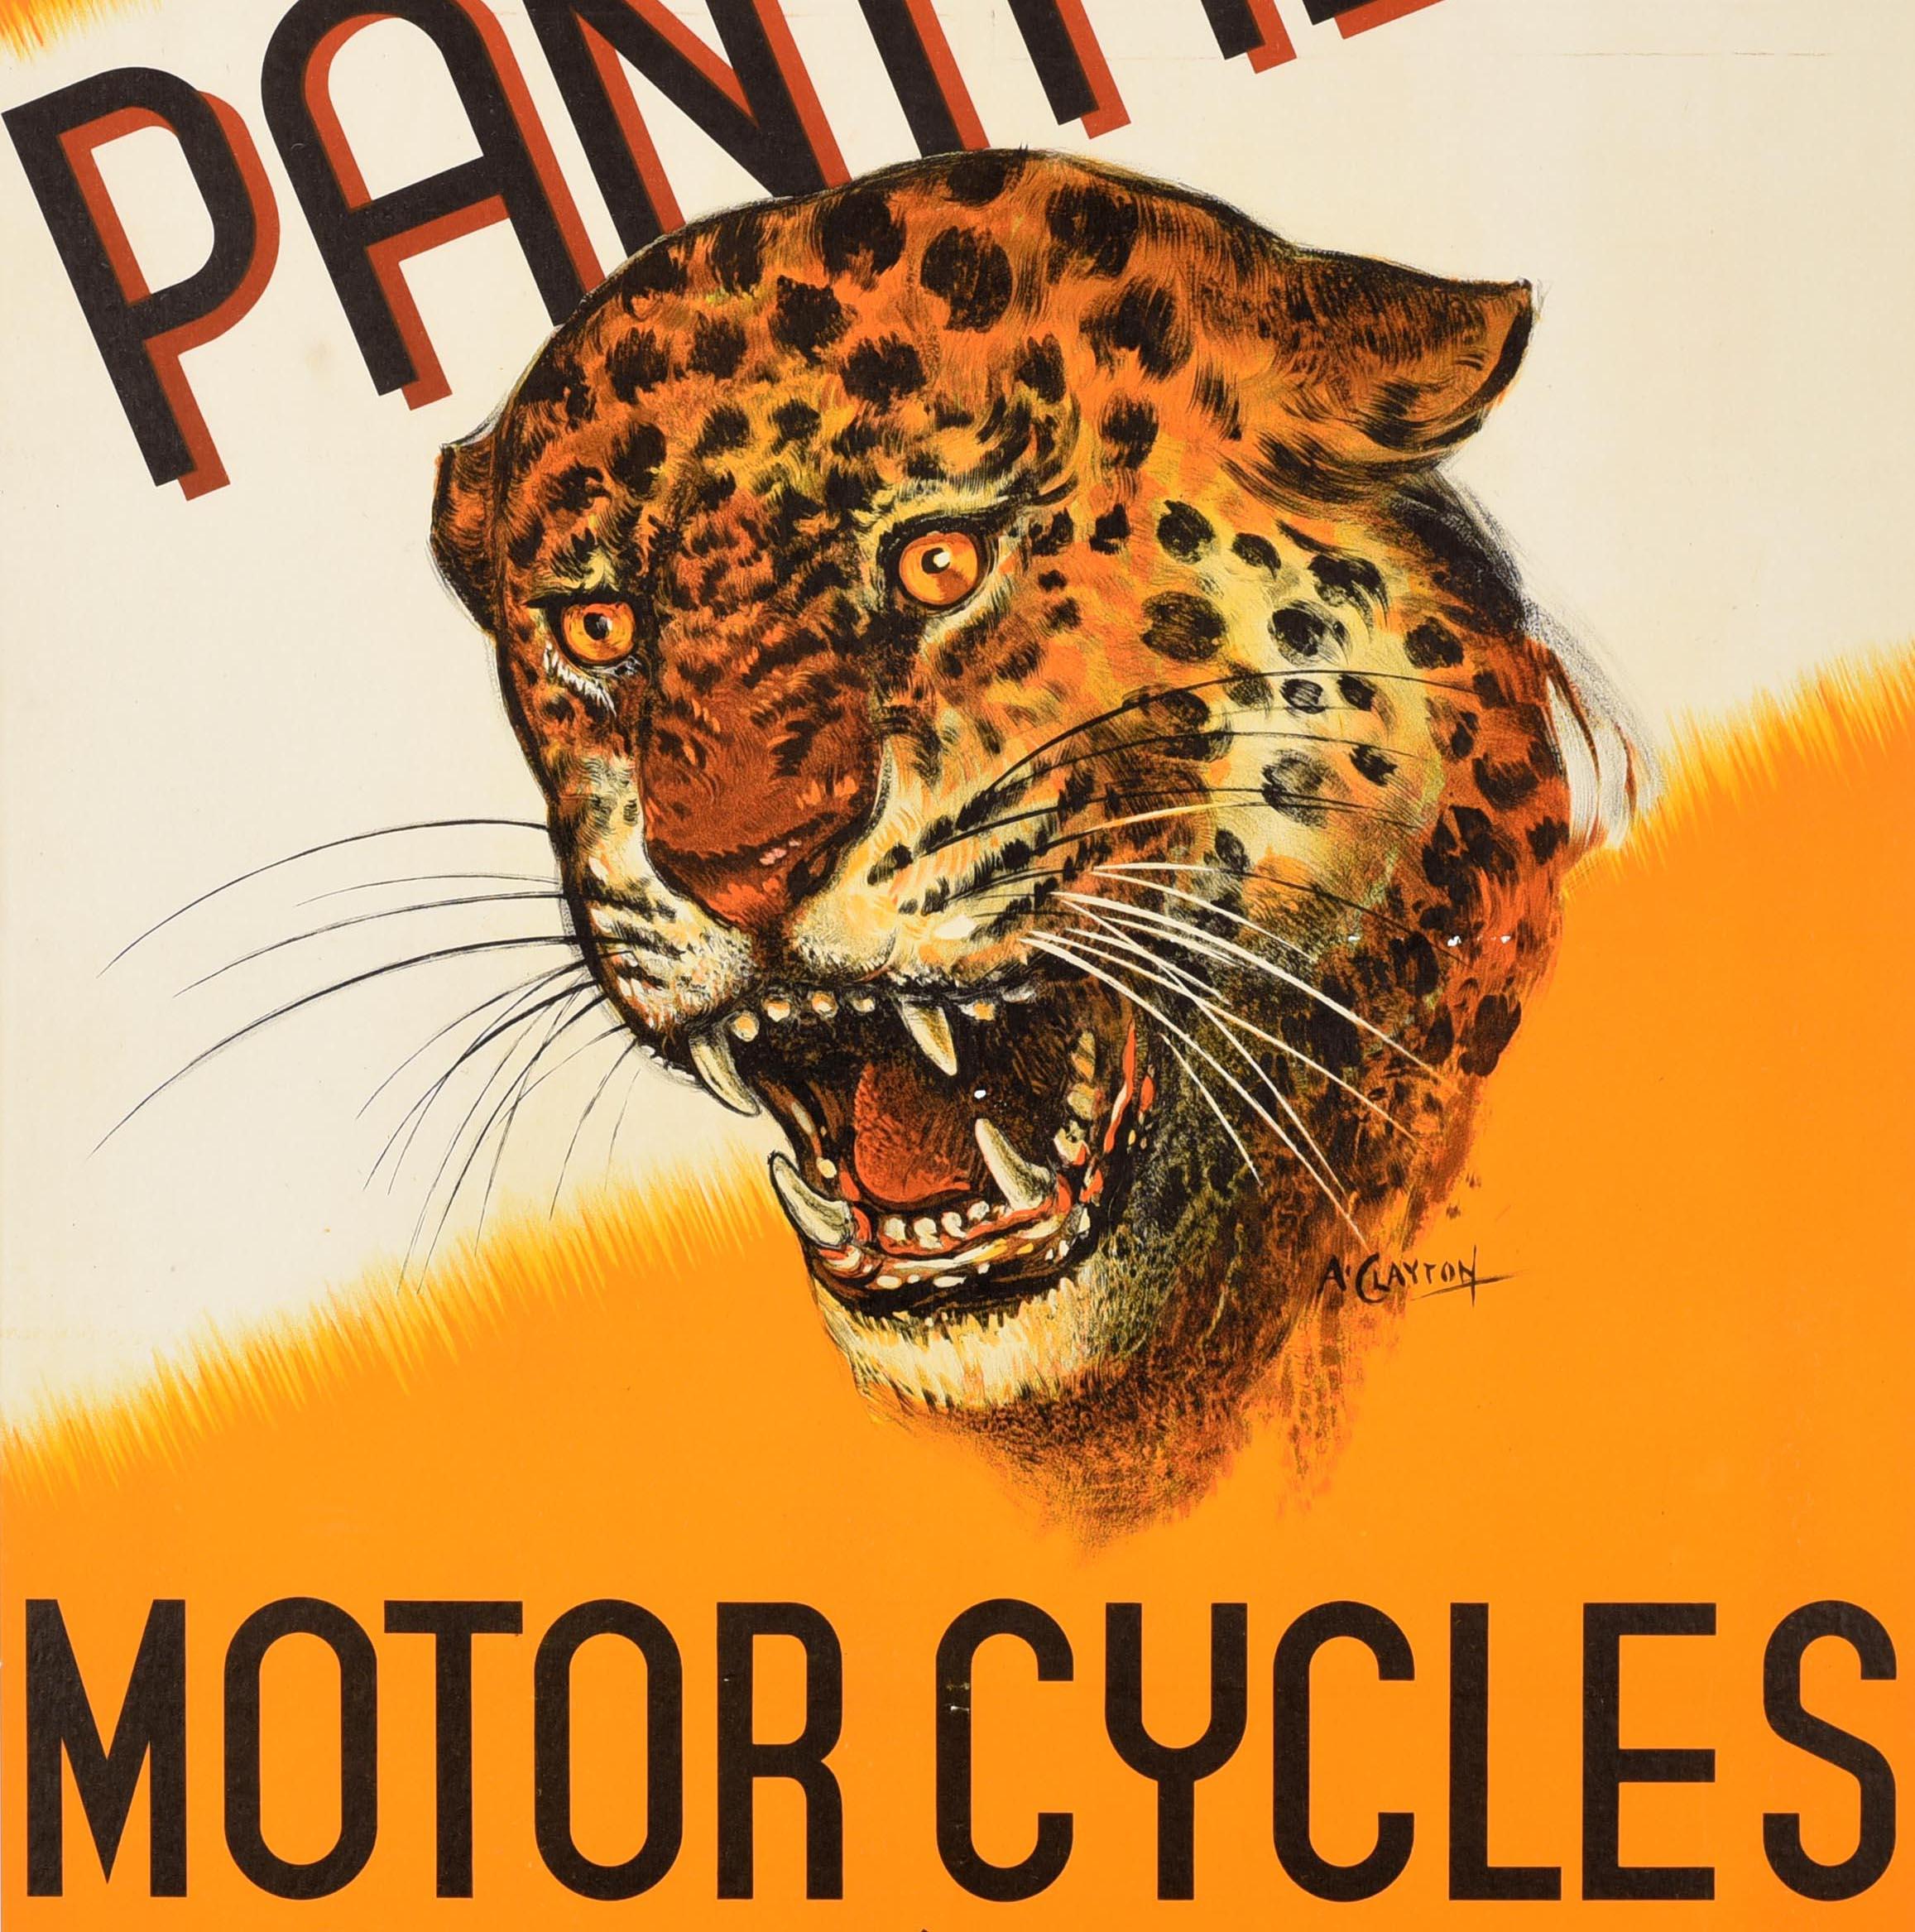 Original vintage advertising poster for Panther Motor Cycles Powered for Mastery Phelon & Moore Ltd Cleckheaton and London. Great image of a jaguar baring its teeth against a dynamic yellow and white background, the title in bold black and deep red